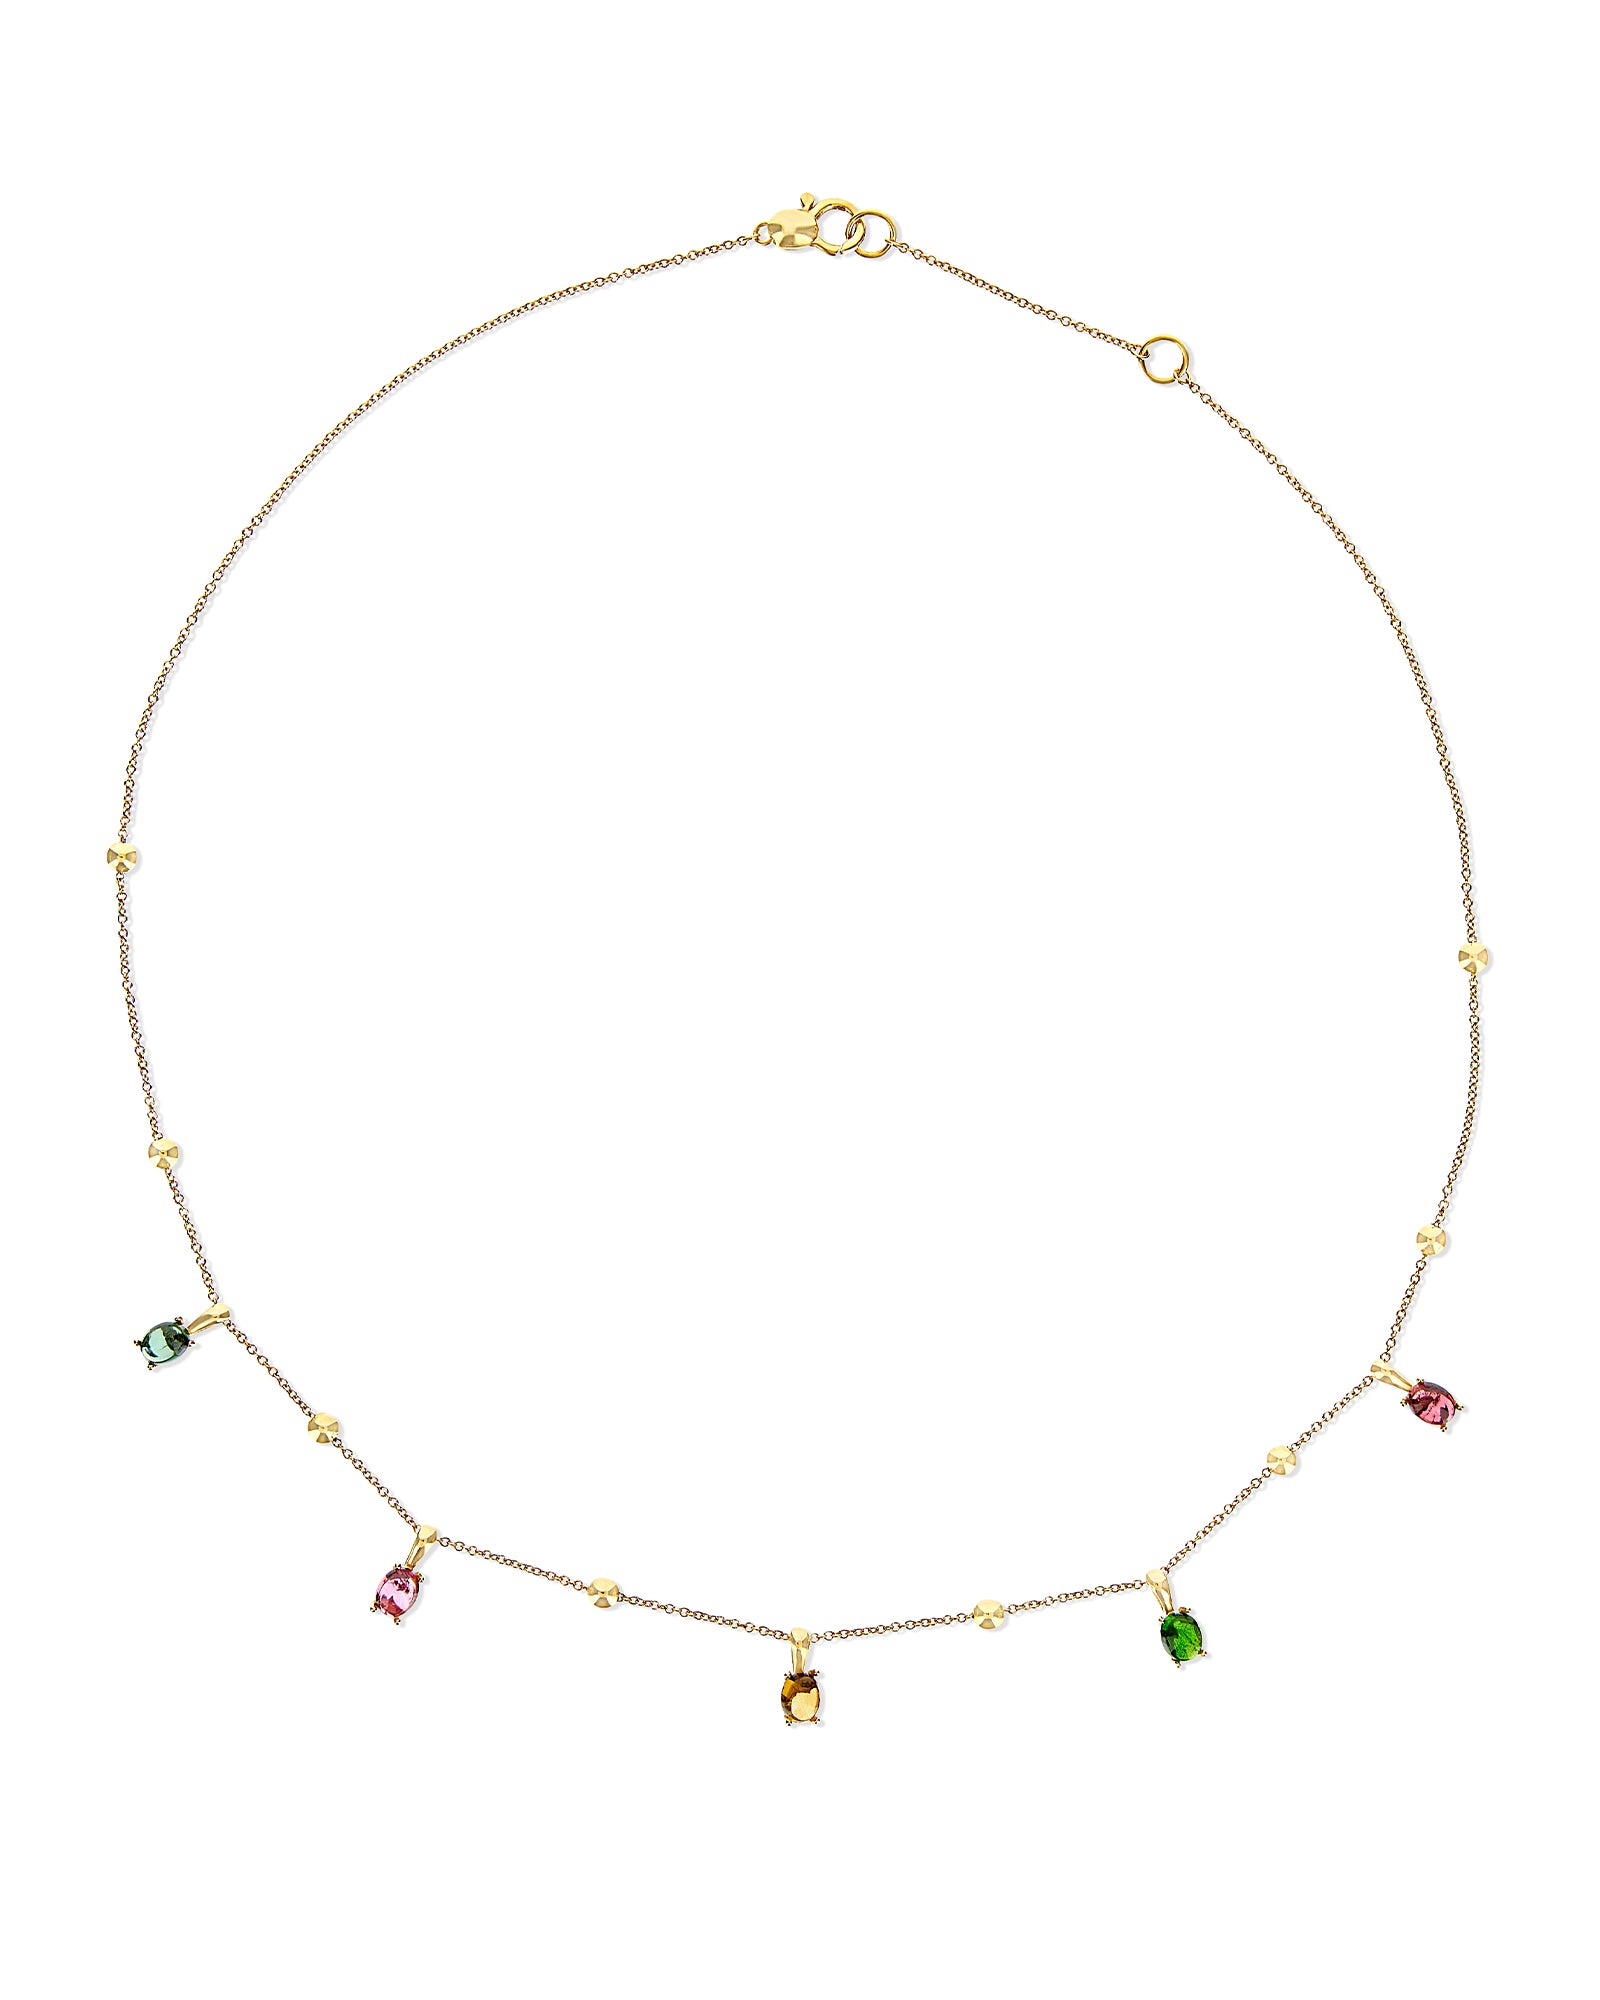 "Tourmalines" Gold and tourmaline colorful collar necklace